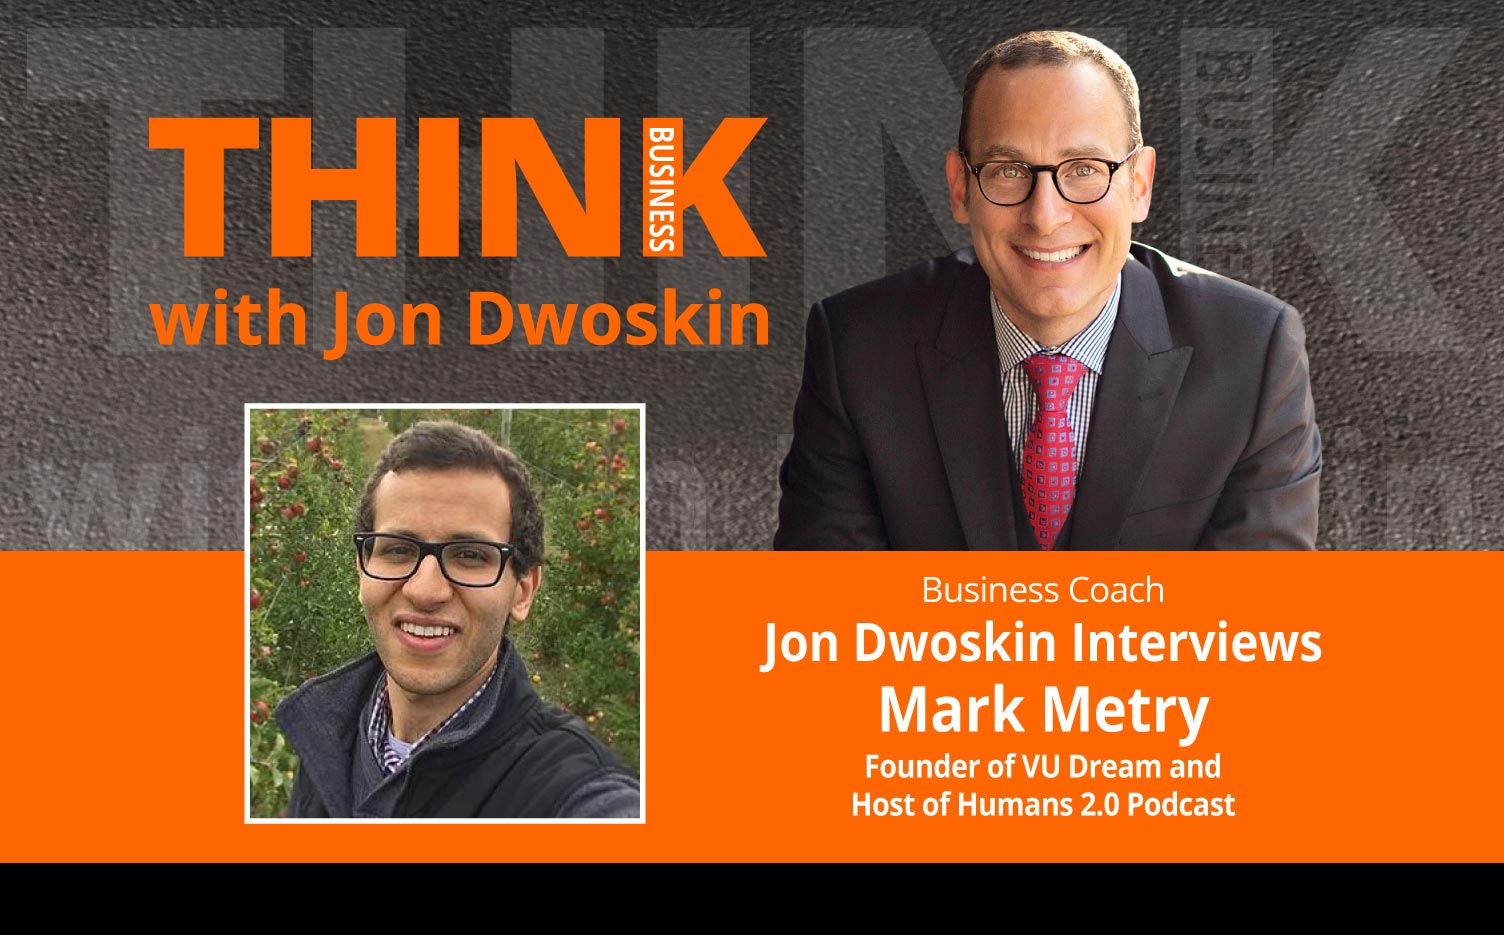 THINK Business Podcast: Jon Dwoskin Interviews Mark Metry, Founder of VU Dream and Host of Humans 2.0 Podcast